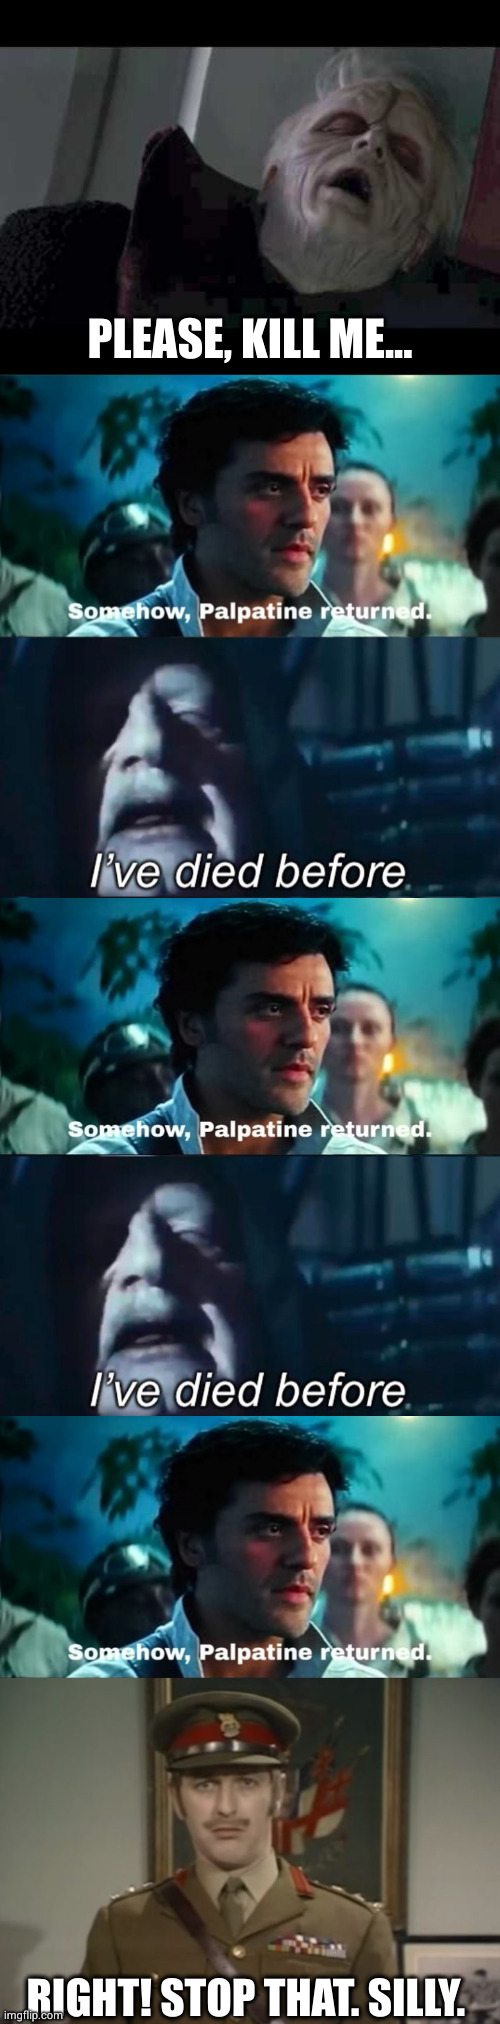 More sequels. | PLEASE, KILL ME... RIGHT! STOP THAT. SILLY. | image tagged in emperor palpatine,somehow palpatine returned with text,i've died before,monty python colonel | made w/ Imgflip meme maker